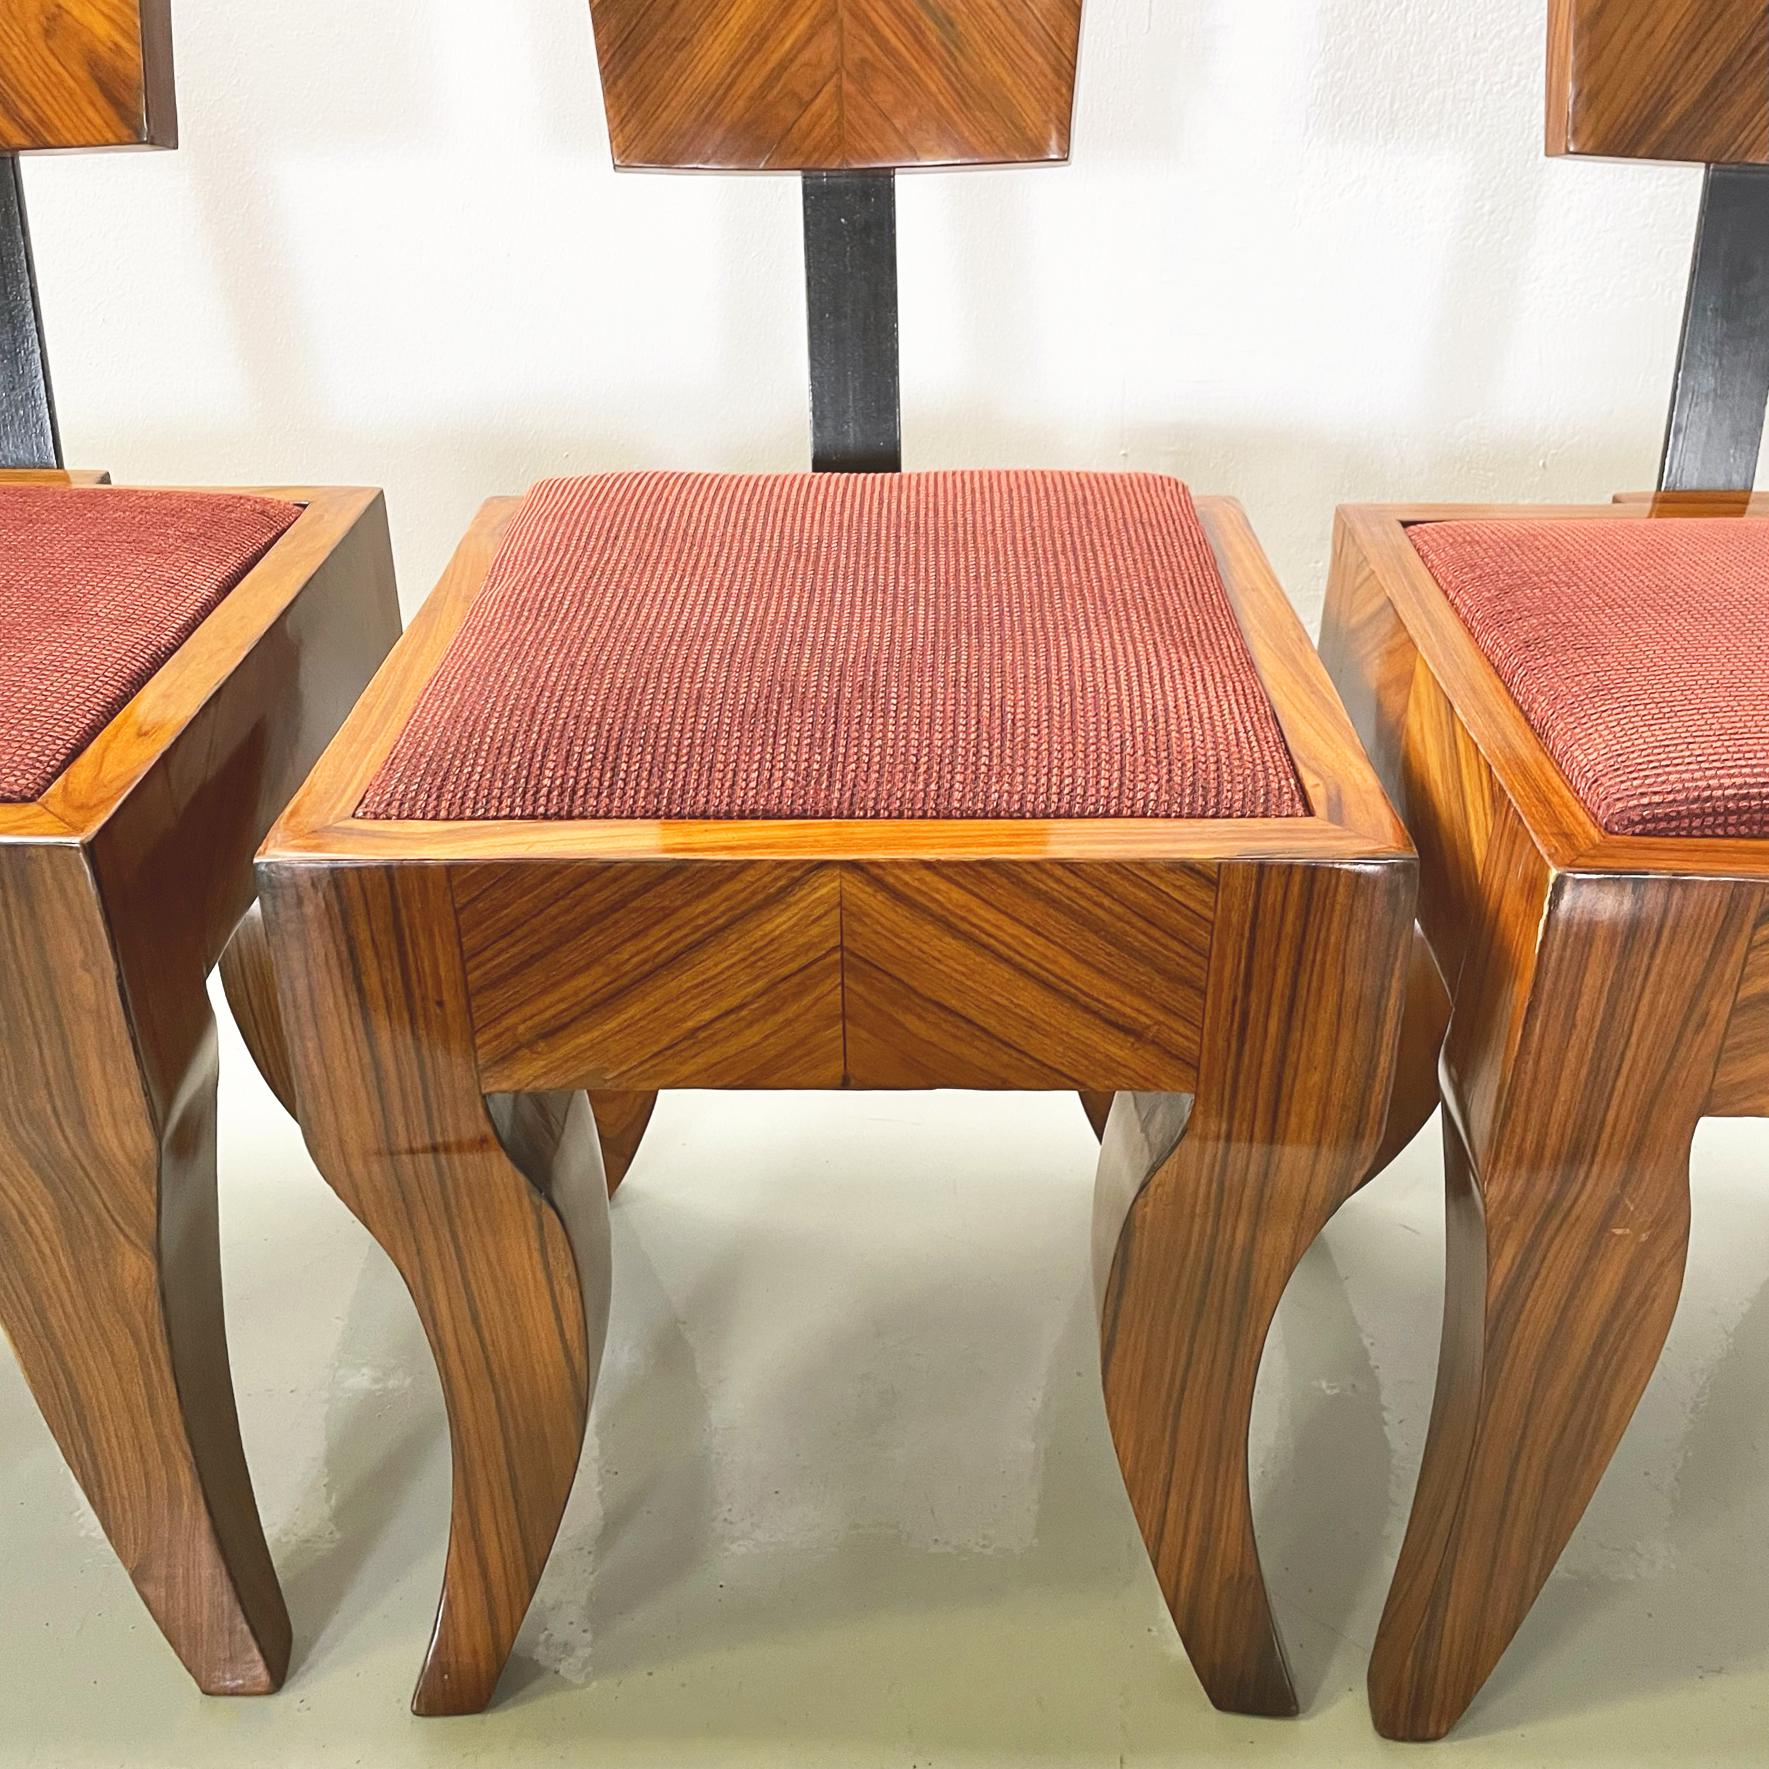 Italian Art Deco Chairs in Solid Wood, Black Metal and Red Fabric, 1920s-1930s For Sale 4